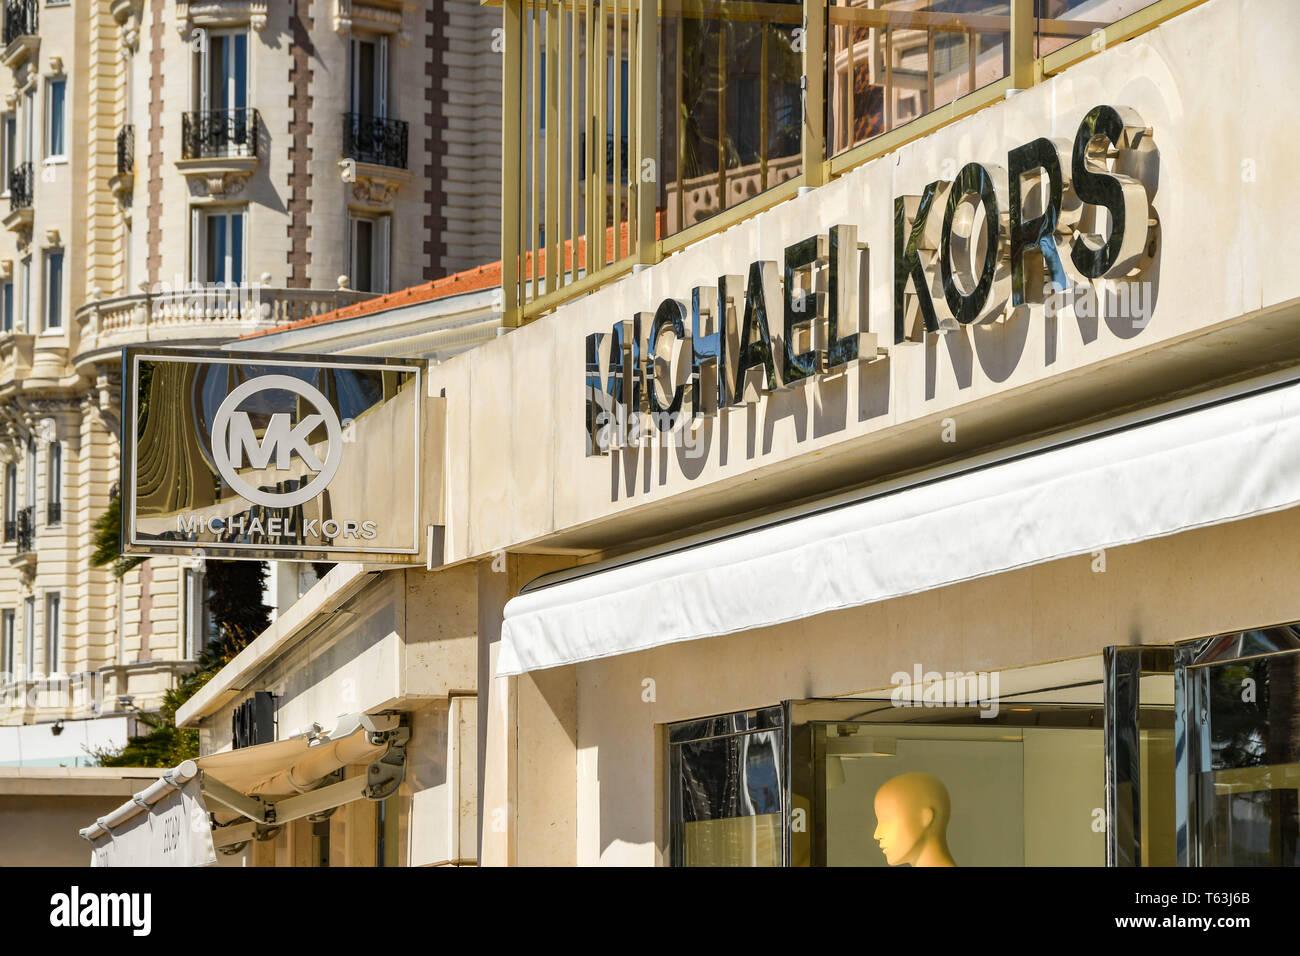 CANNES, FRANCE - APRIL 2019: Signs outside the Michael Kors store on the  seafront in Cannes. It is a well known brand of designer goods Stock Photo  - Alamy